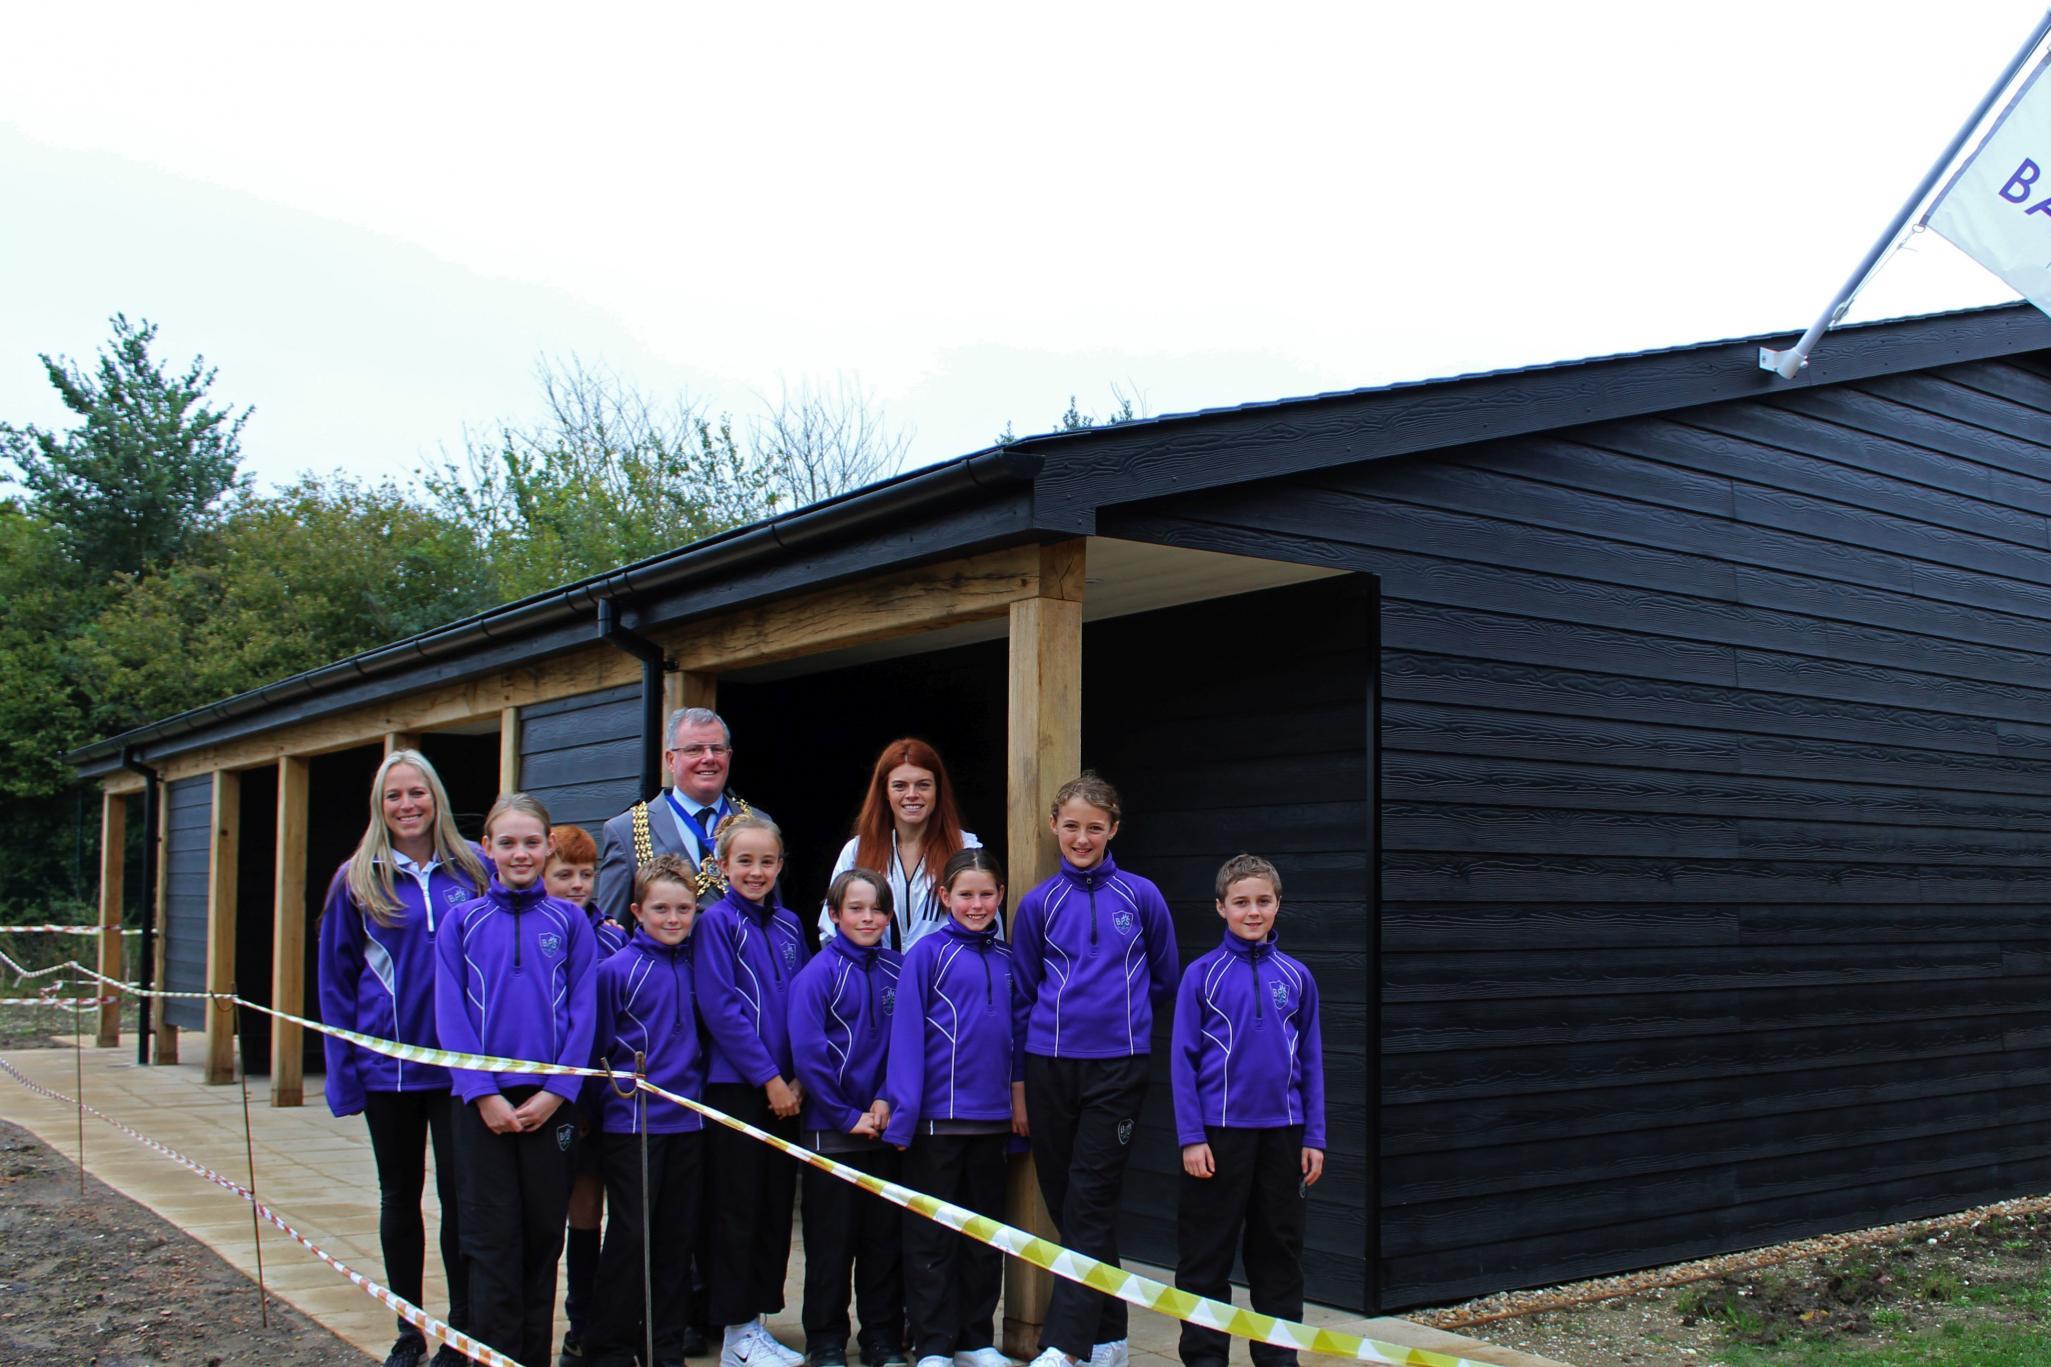 Students join Paralympic champion to unveil Banstead sports pavilion